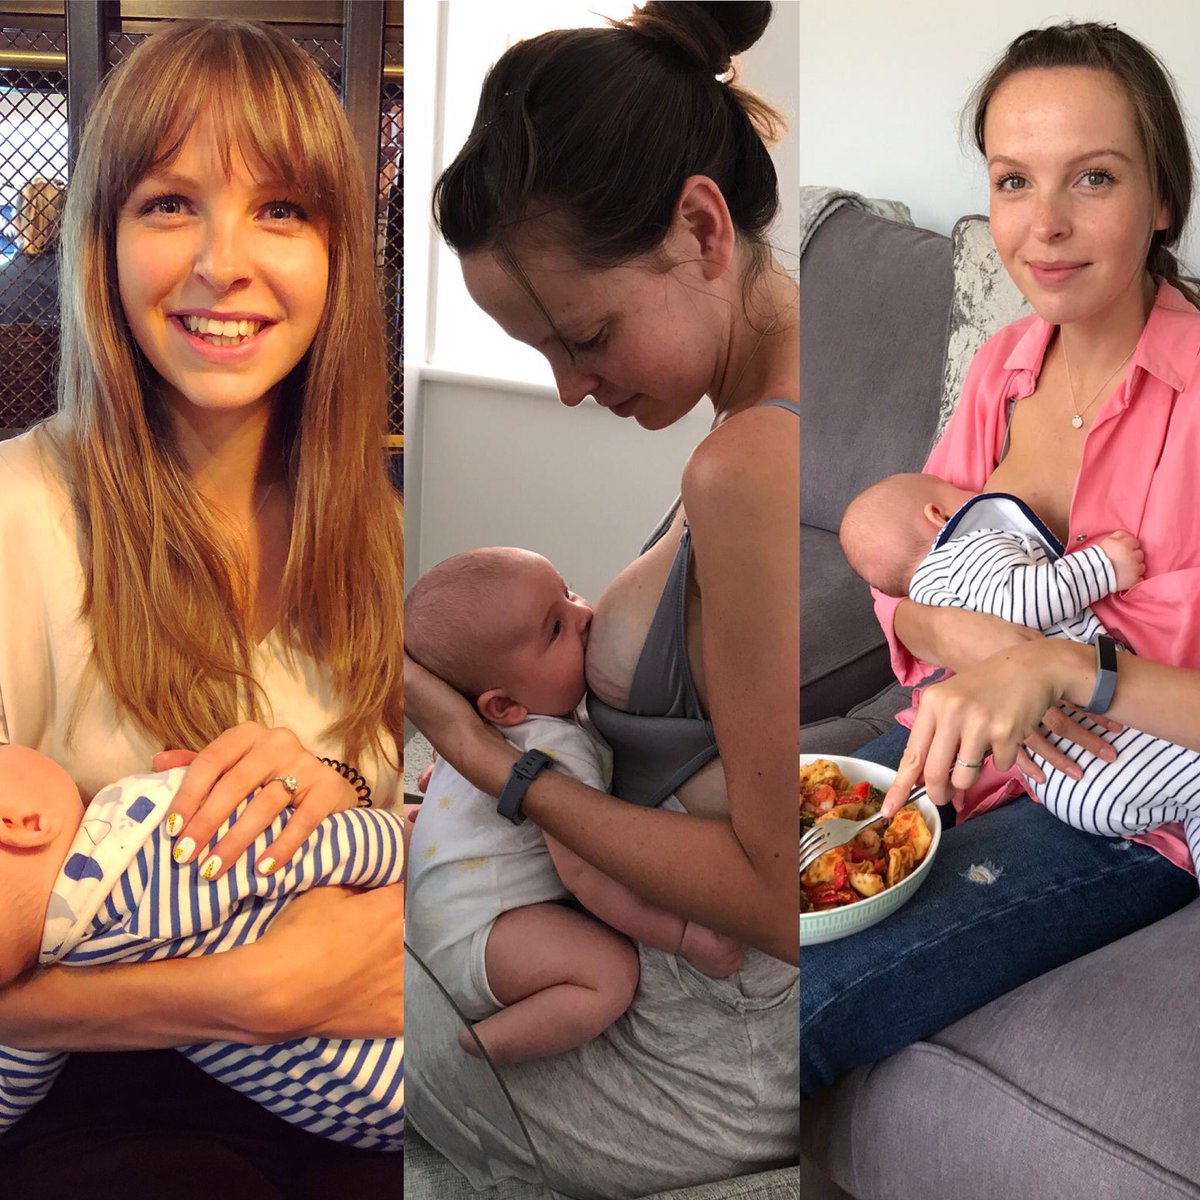 Cried through most feeds for six weeks because breastfeeding is hard as hell.
Hands together for all of the mums that breastfeed, tried to breastfeed, express and bottlefeed or that formula feed - heroes the lot of you! 🍈🍈🍼#NationalBreastfeedingMonth #normalisebreastfeeding